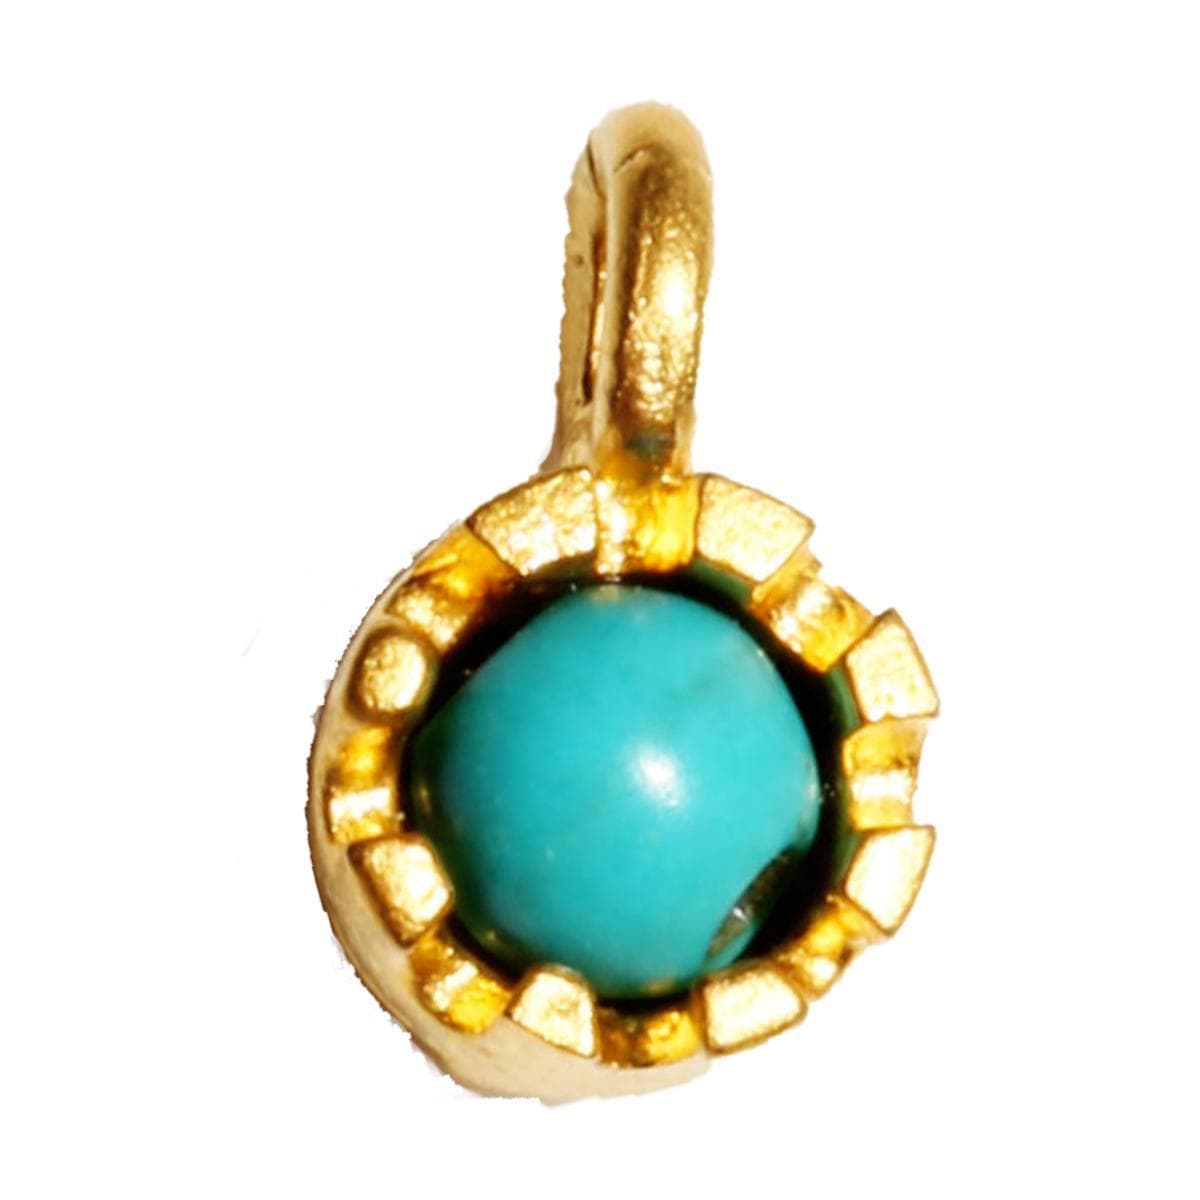 Feng Shui Jewelry - THE BRIGHT SPOT